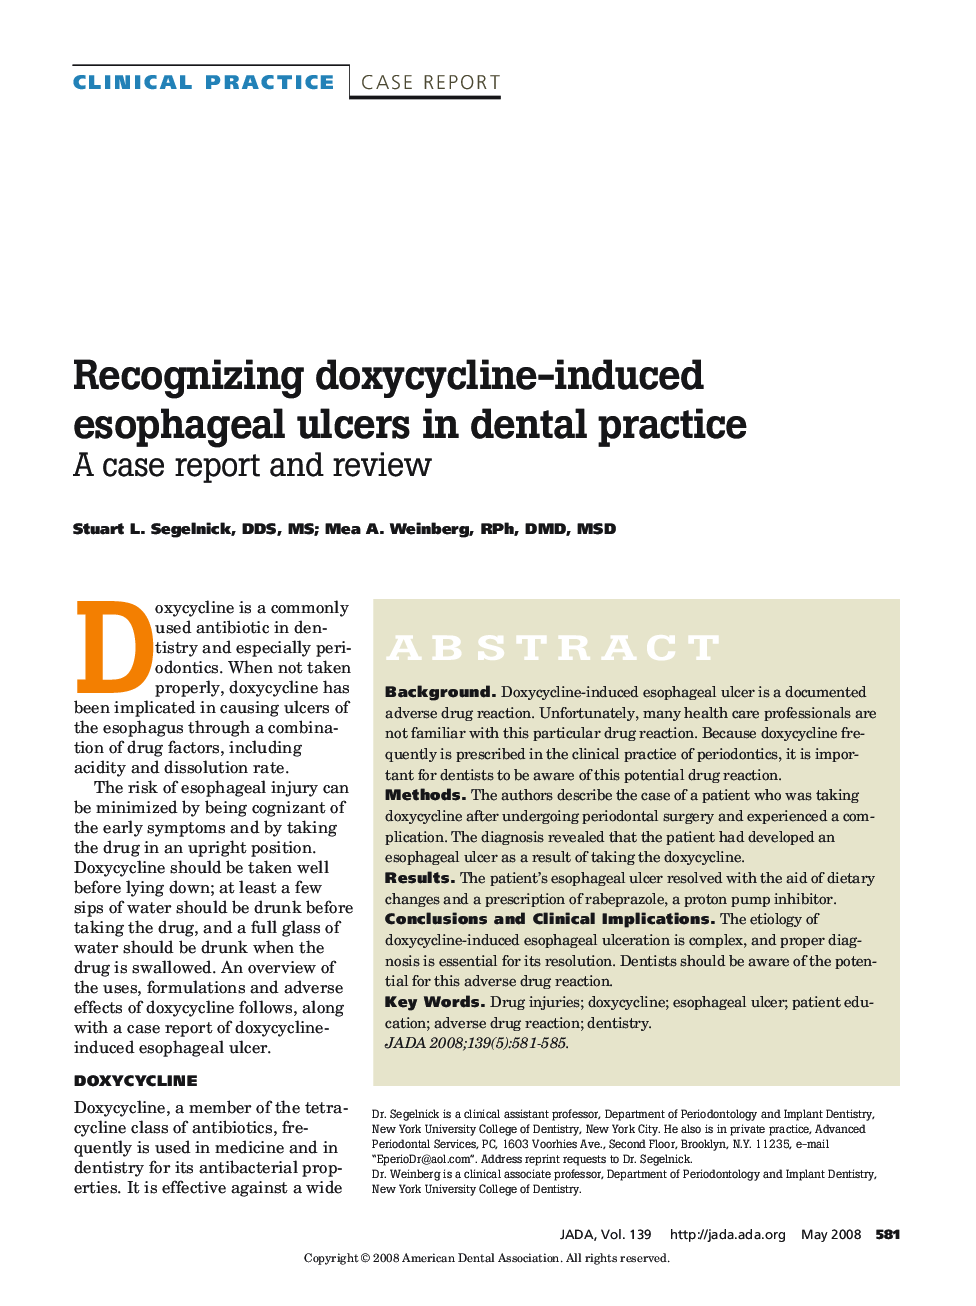 Recognizing Doxycycline-Induced Esophageal Ulcers in Dental Practice